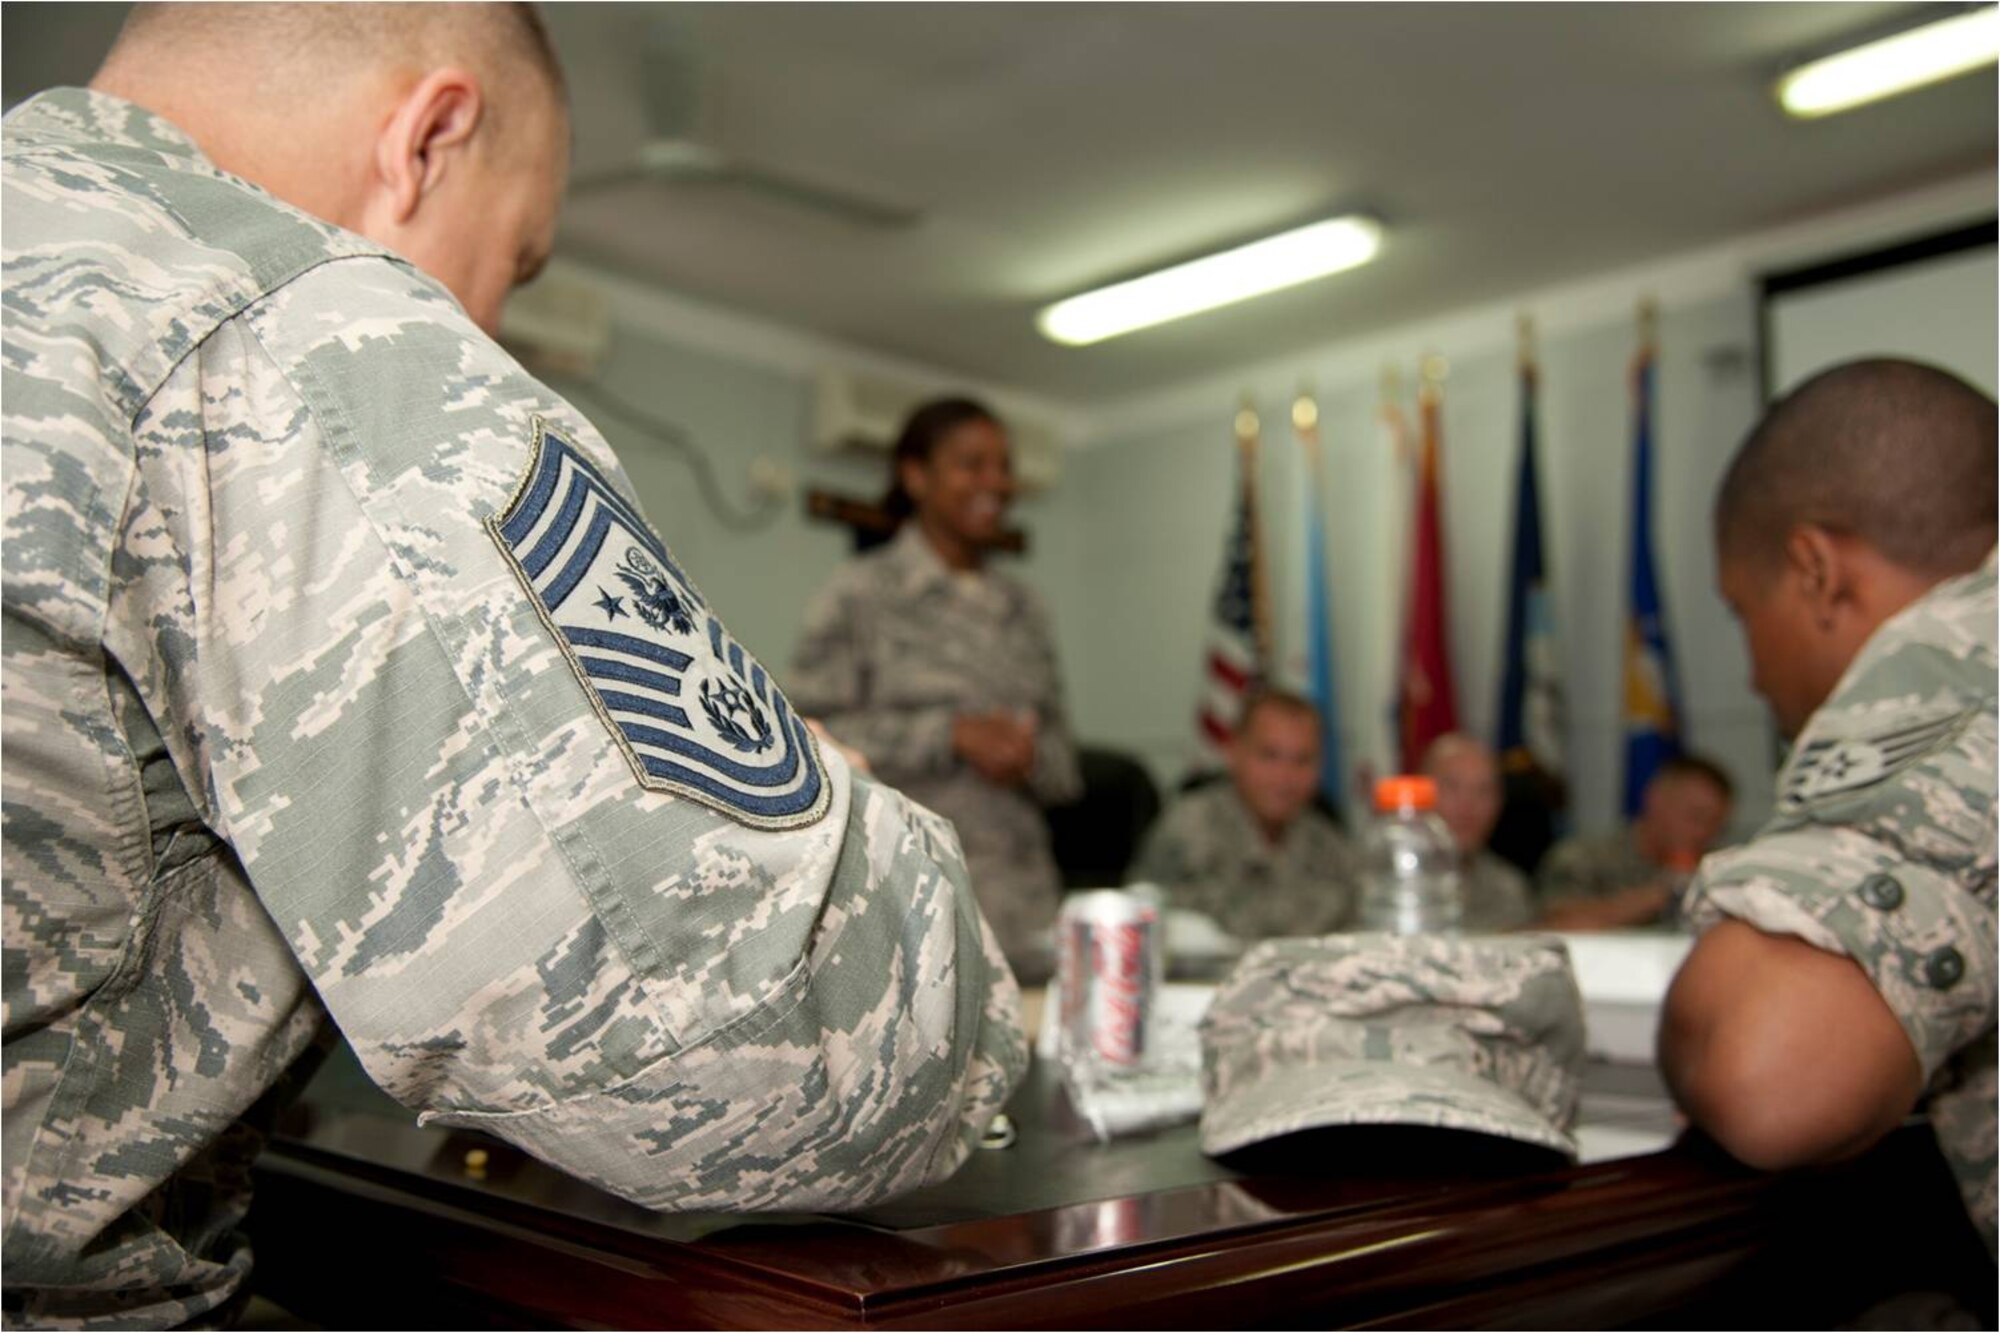 Chief Master Sgt. of the Air Force James A. Roy shares lunch with a  group U.S. Air Force staff and technical sergeants deployed to Camp Lemonnier, Combined Joint Task Force – Horn of Africa and other tenant commands at CJTF-HOA commander’s conference room here May 6. Roy interacted with the Airmen to address their concerns and share information regarding the Air Force directly from a senior enlisted leadership perspective. (U.S. Air Force photo by Senior Airman Lael Huss)